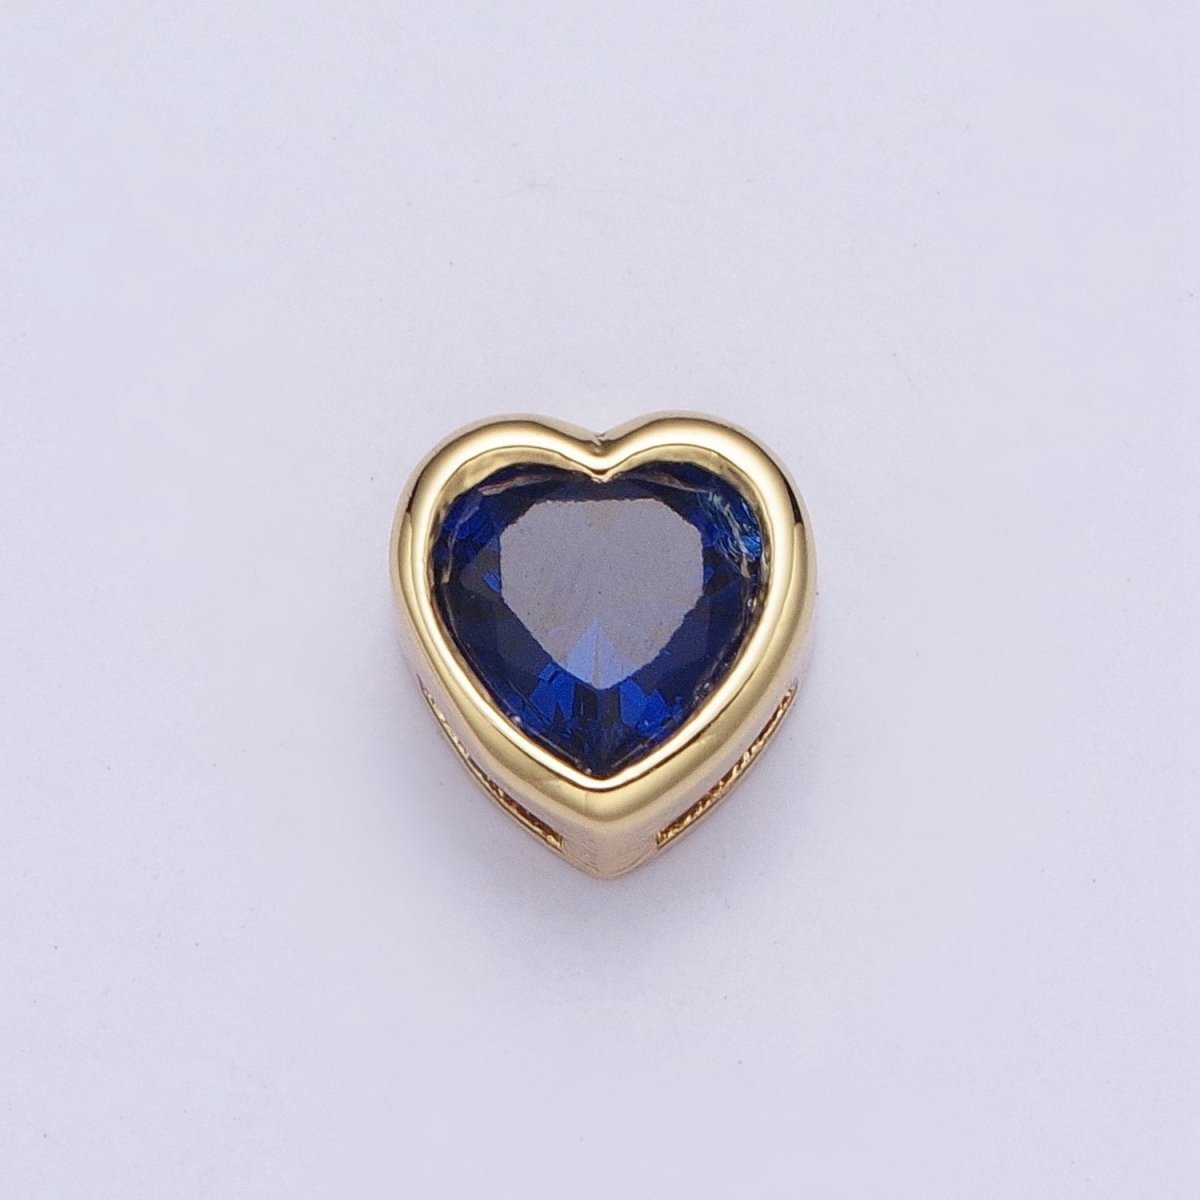 Colorful Cubiz Zirconia Heart Gold Bezel Beads - 7mm Dainty Bright 3D Love Jewelry Gold Filled Love Beads spacer for Bracelet Necklace Supply W-912-W-919 - DLUXCA